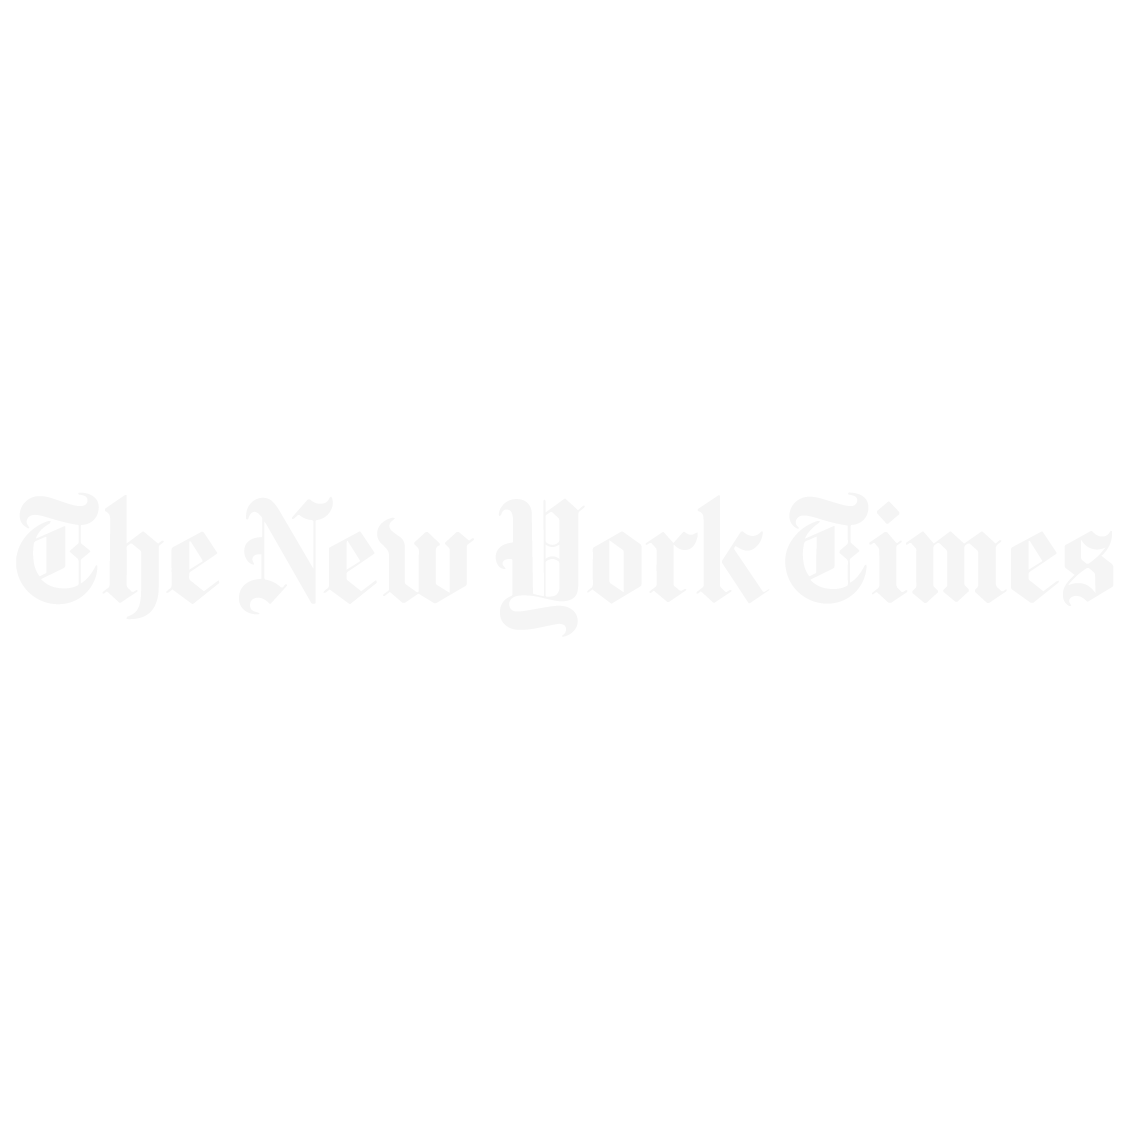 press-logos-square_the new york times.png